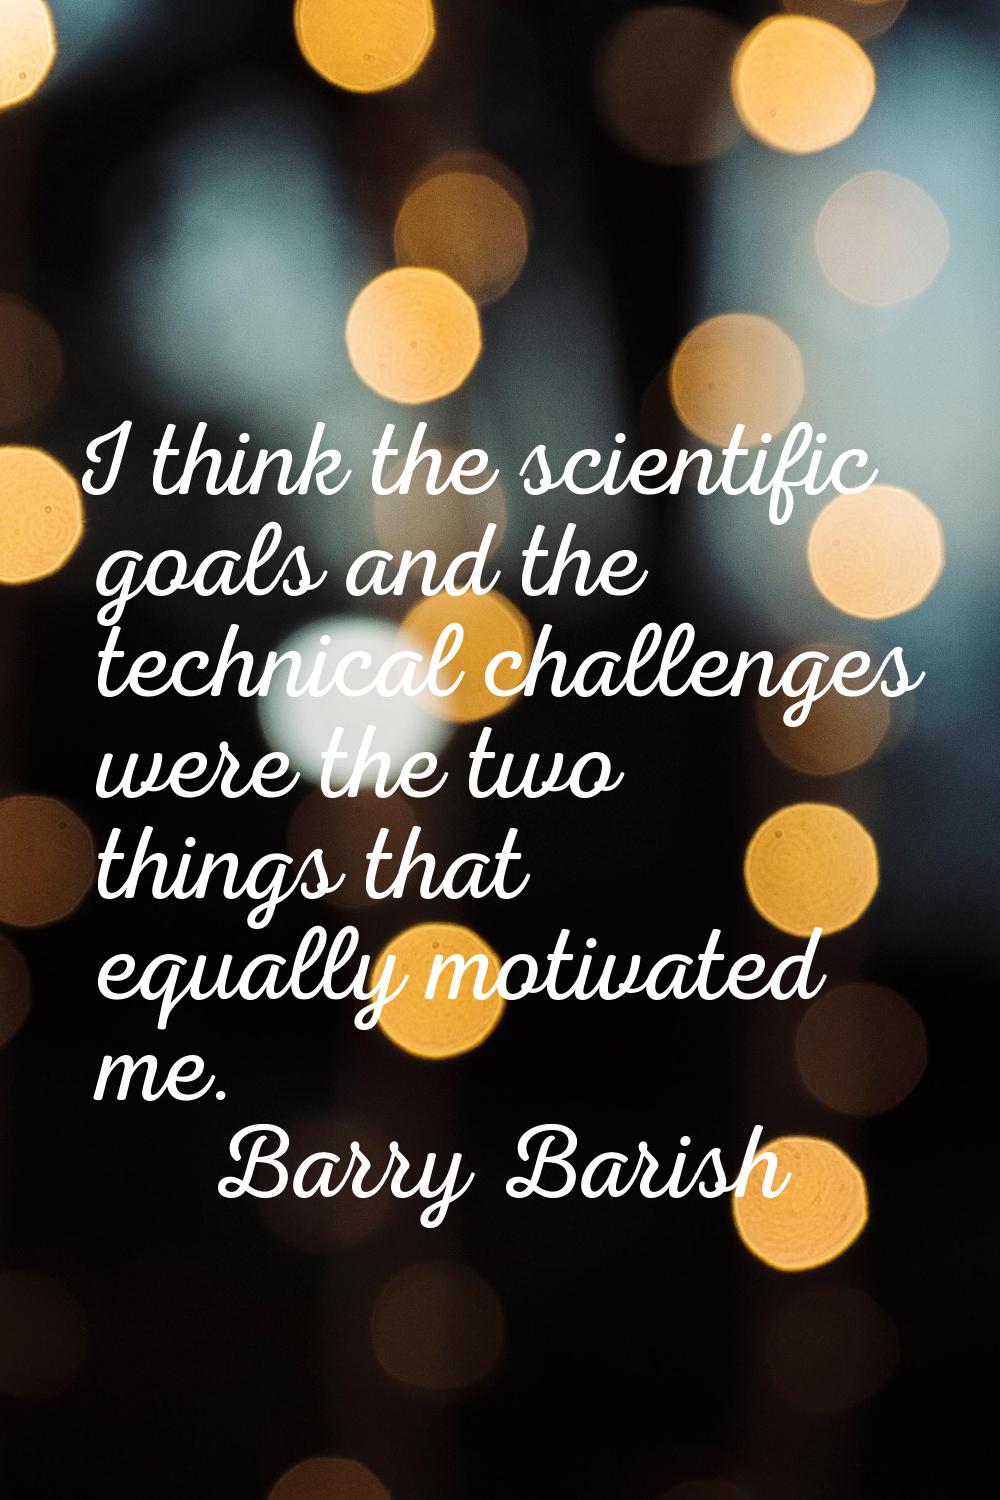 I think the scientific goals and the technical challenges were the two things that equally motivate